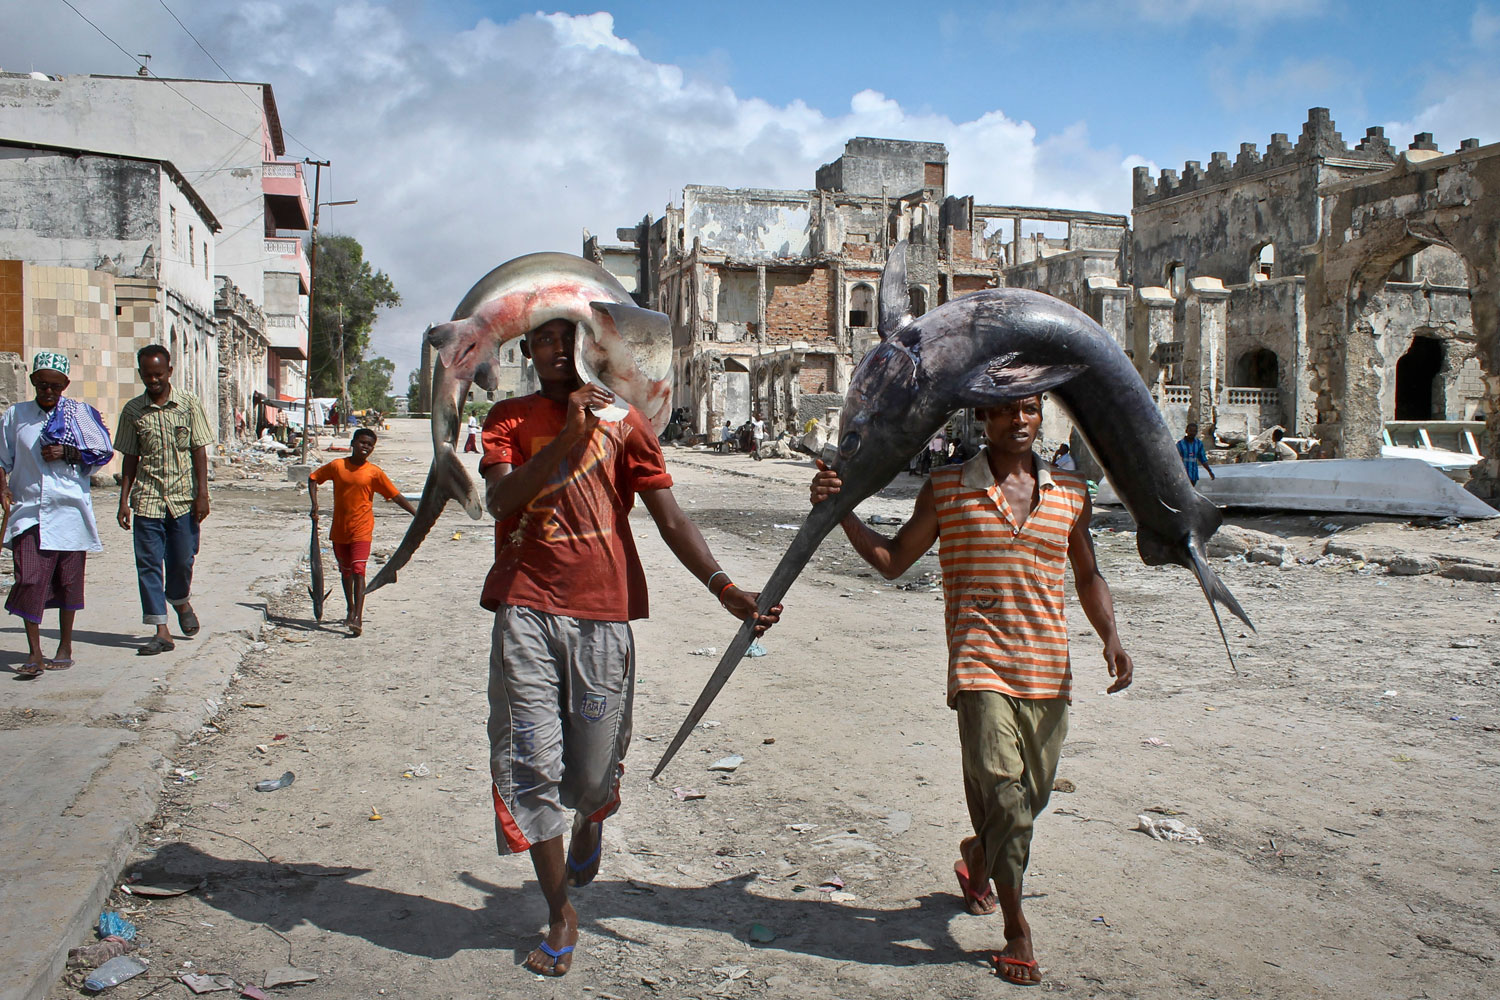 Image: Oct. 25, 2012. Somalis carry a swordfish and a shark on their heads from the ocean to the market in Mogadishu, Somalia.